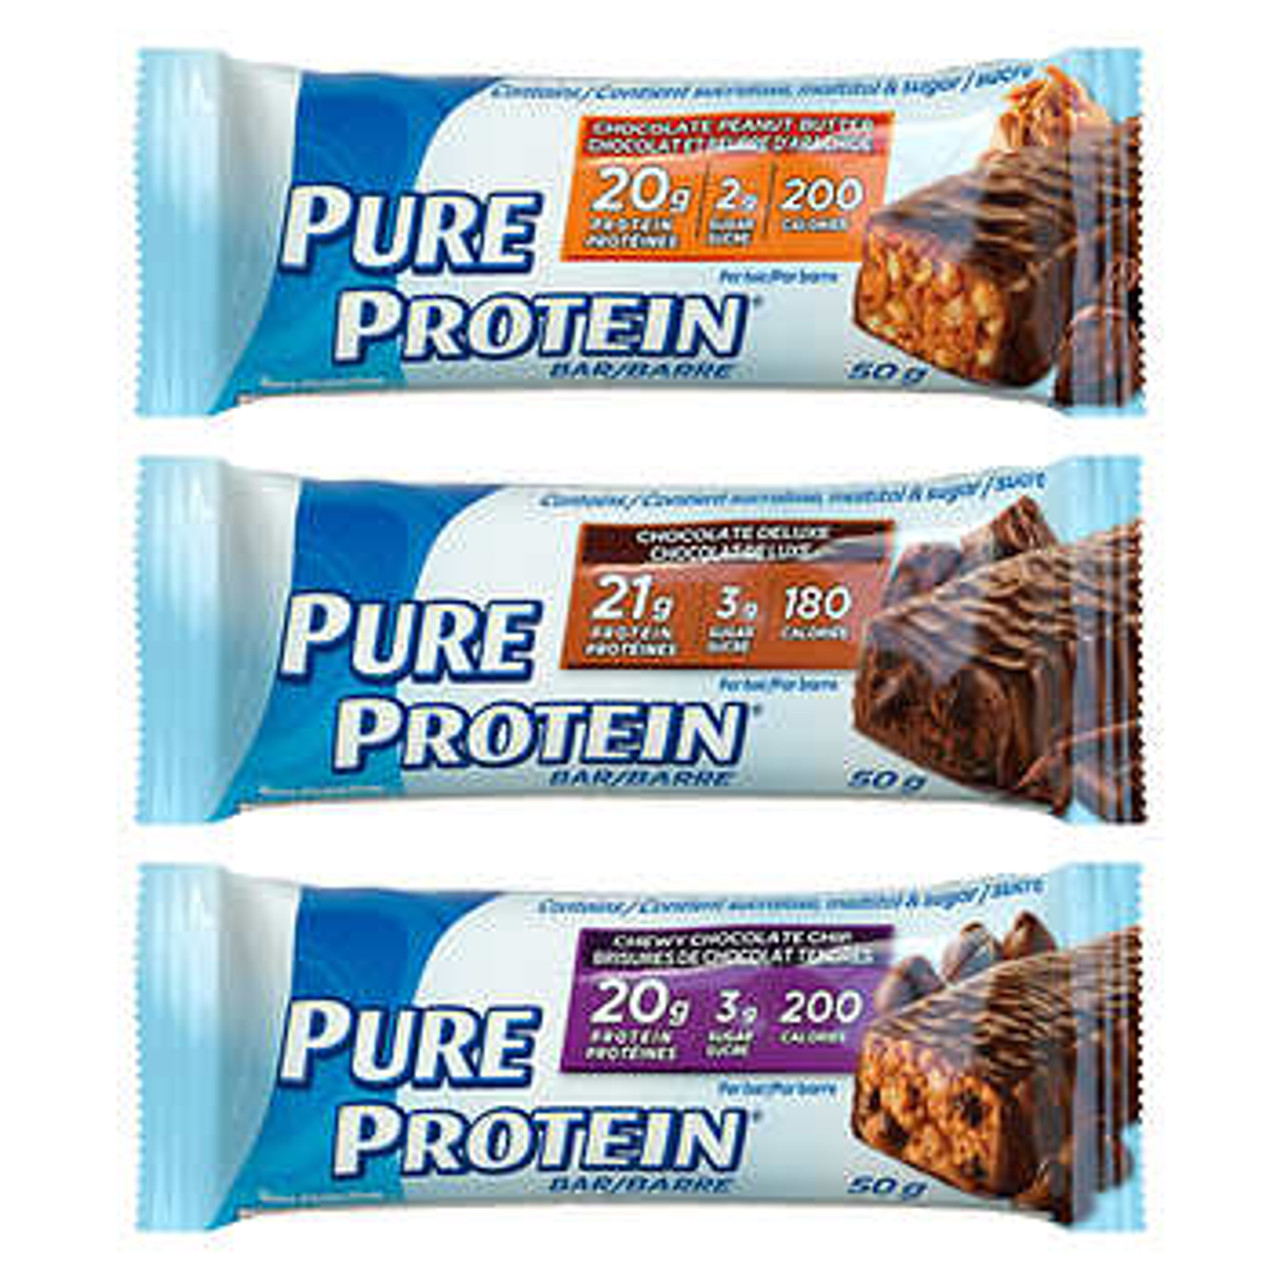 Pure Protein Bar Variety Pack - 18 Bars, 50g (1.76 oz) Each - Assorted Flavors- Chicken Pieces